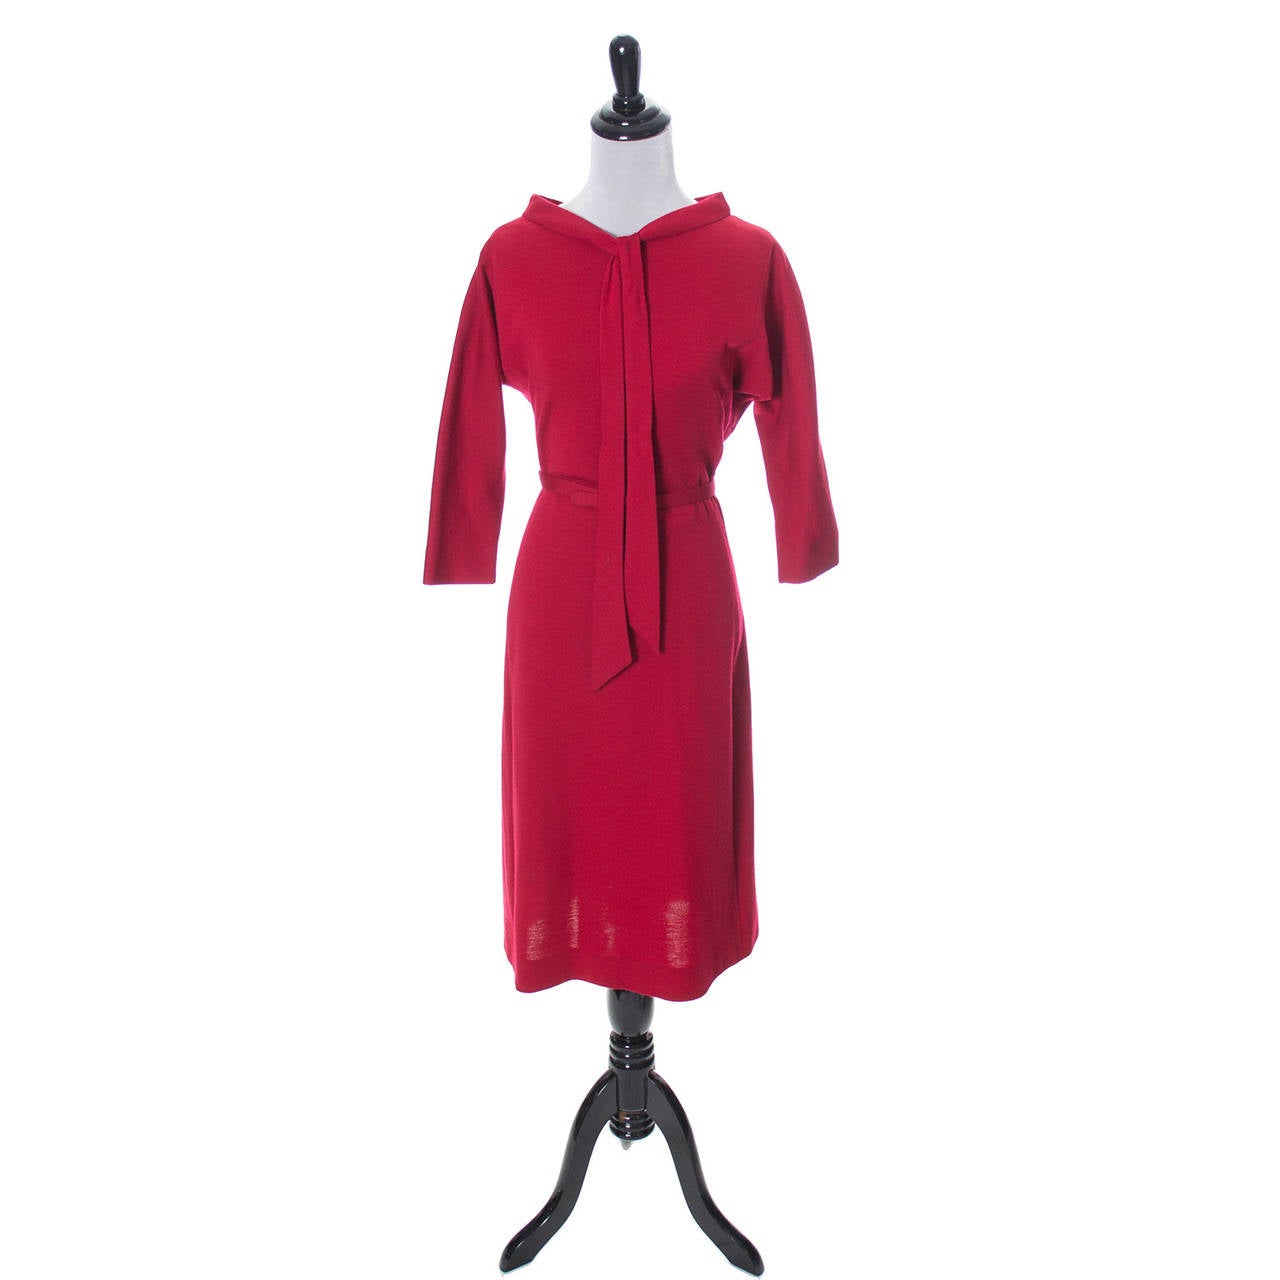 This vintage red wool dress was designed by Norman Norell in the 1960's. The belt is marked Norman Norell and the dress is in excellent condition except for a some wear to the buckle fabric.  There are dolman sleeves, a back zipper, and a wonderful